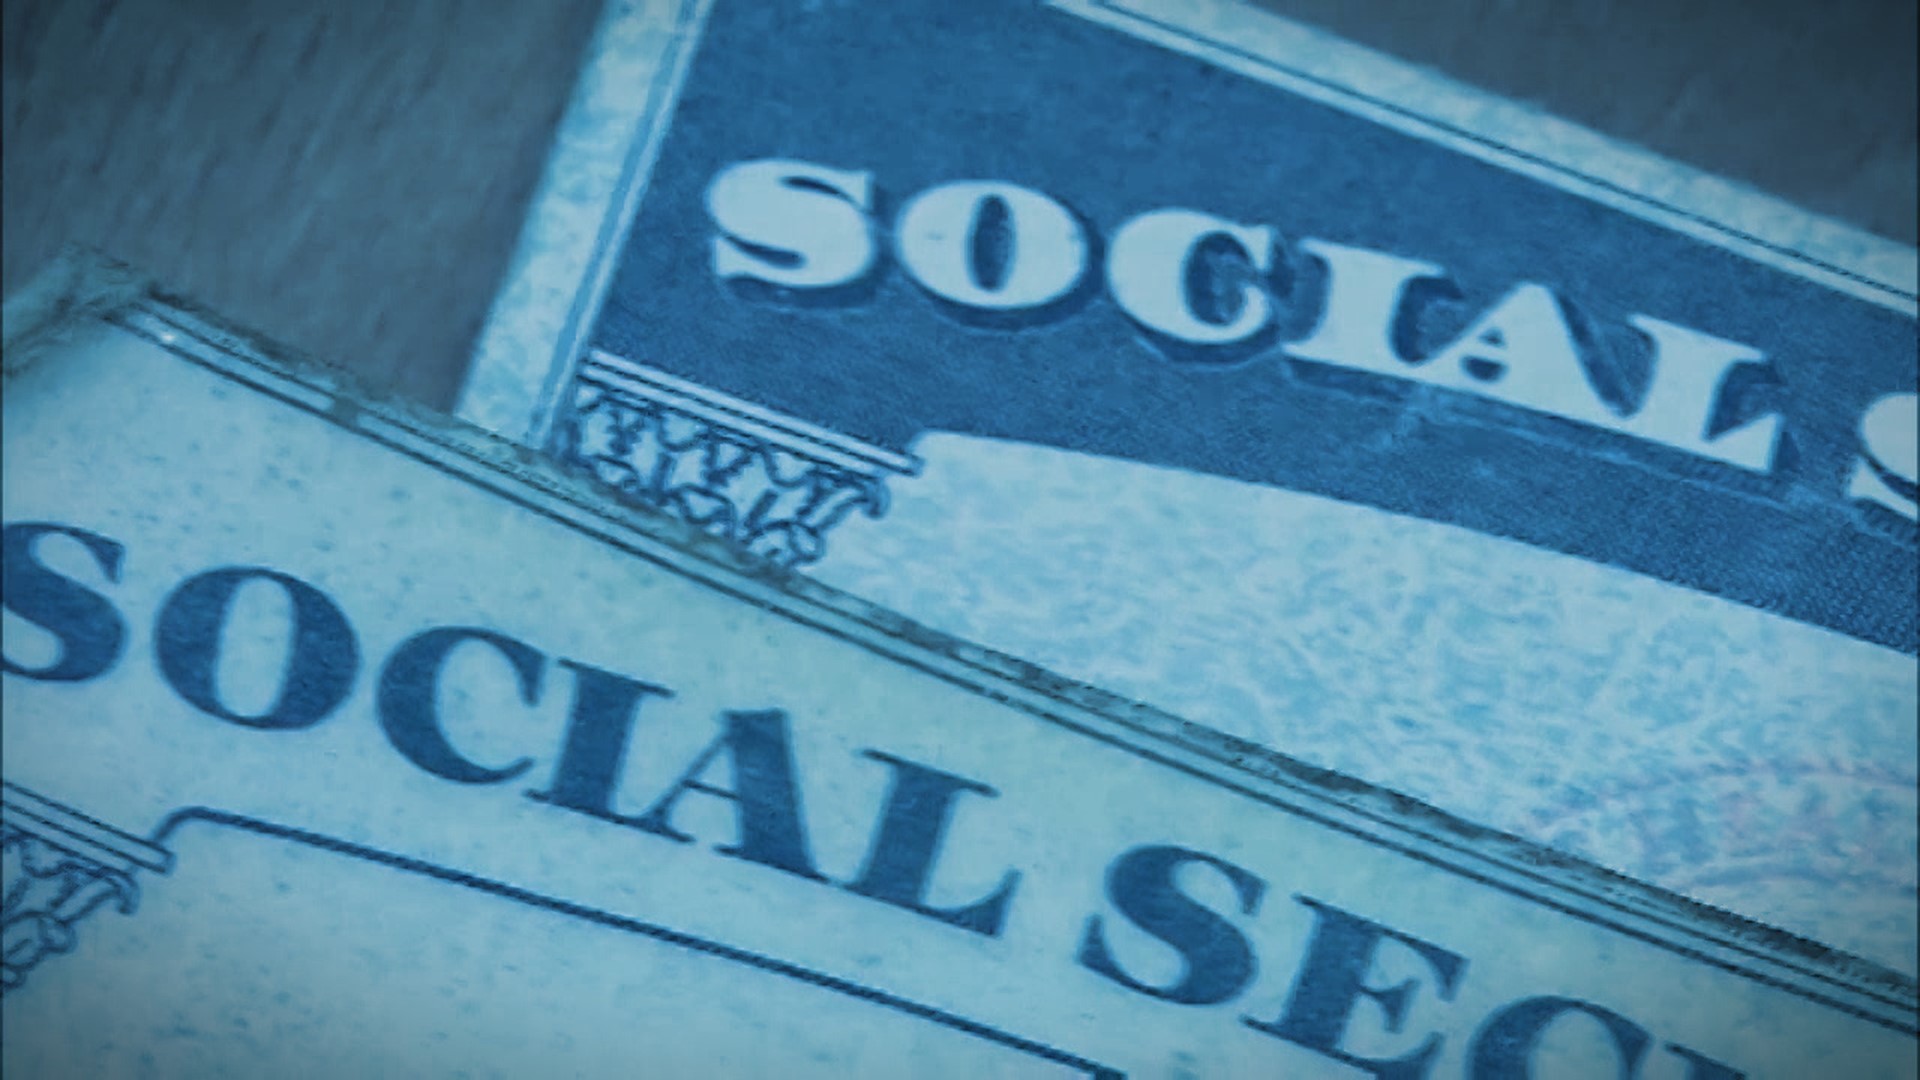 Jon has a breakdown of the increases expected for Social Security recipients.